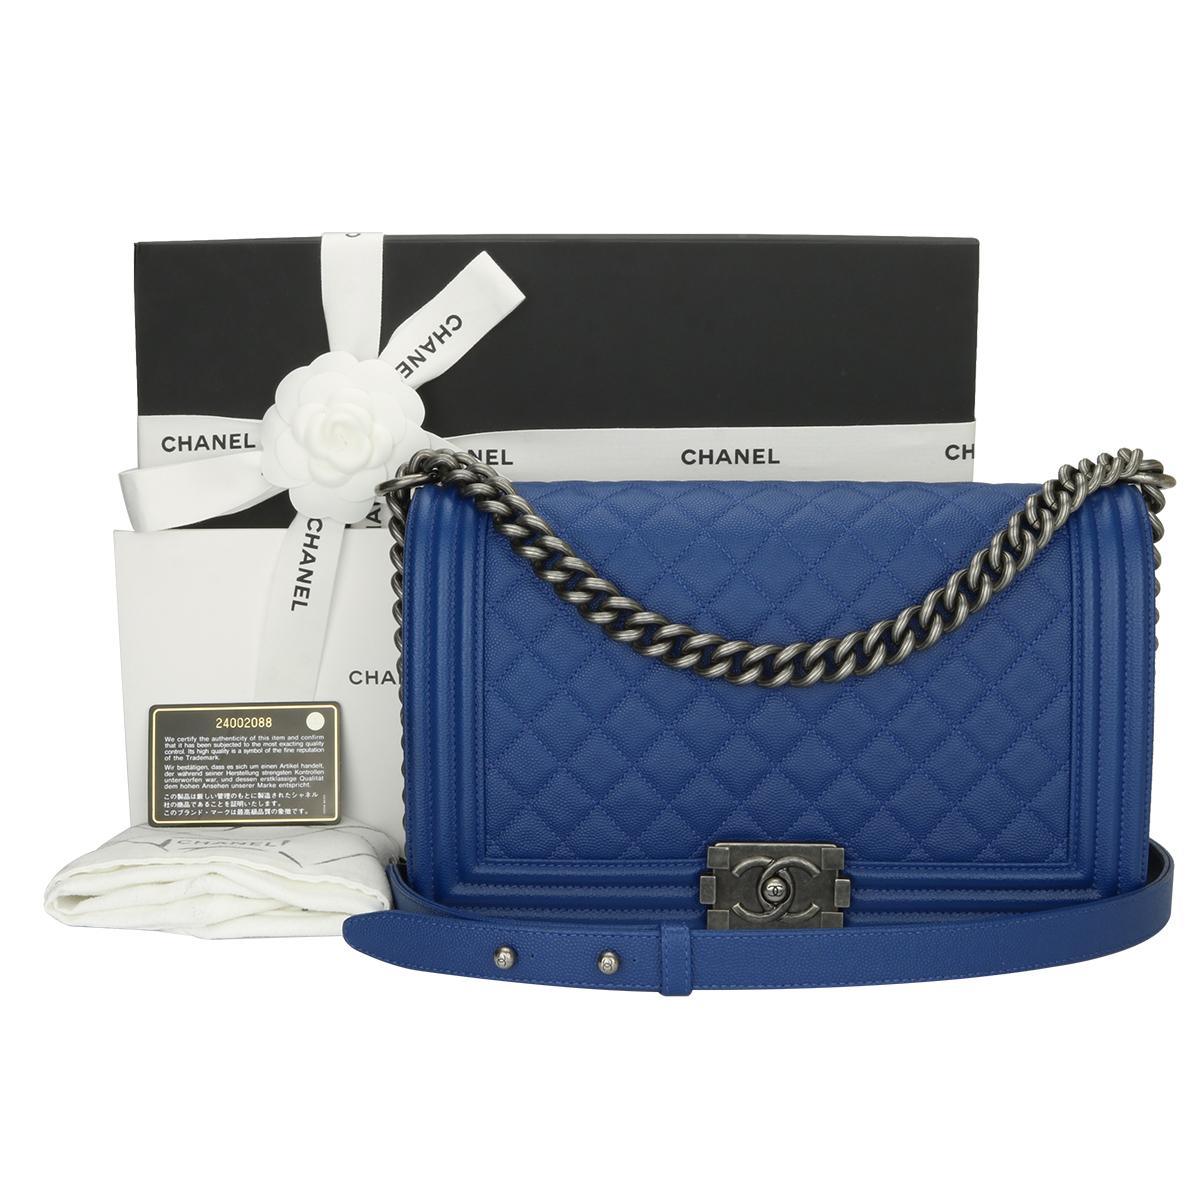 Authentic CHANEL New Medium Quilted Boy Blue Caviar with Ruthenium Hardware 2018.

This stunning bag is still in a mint condition; it still keeps its original shape well and the hardware still very shiny, leather smells fresh as if new.

Exterior